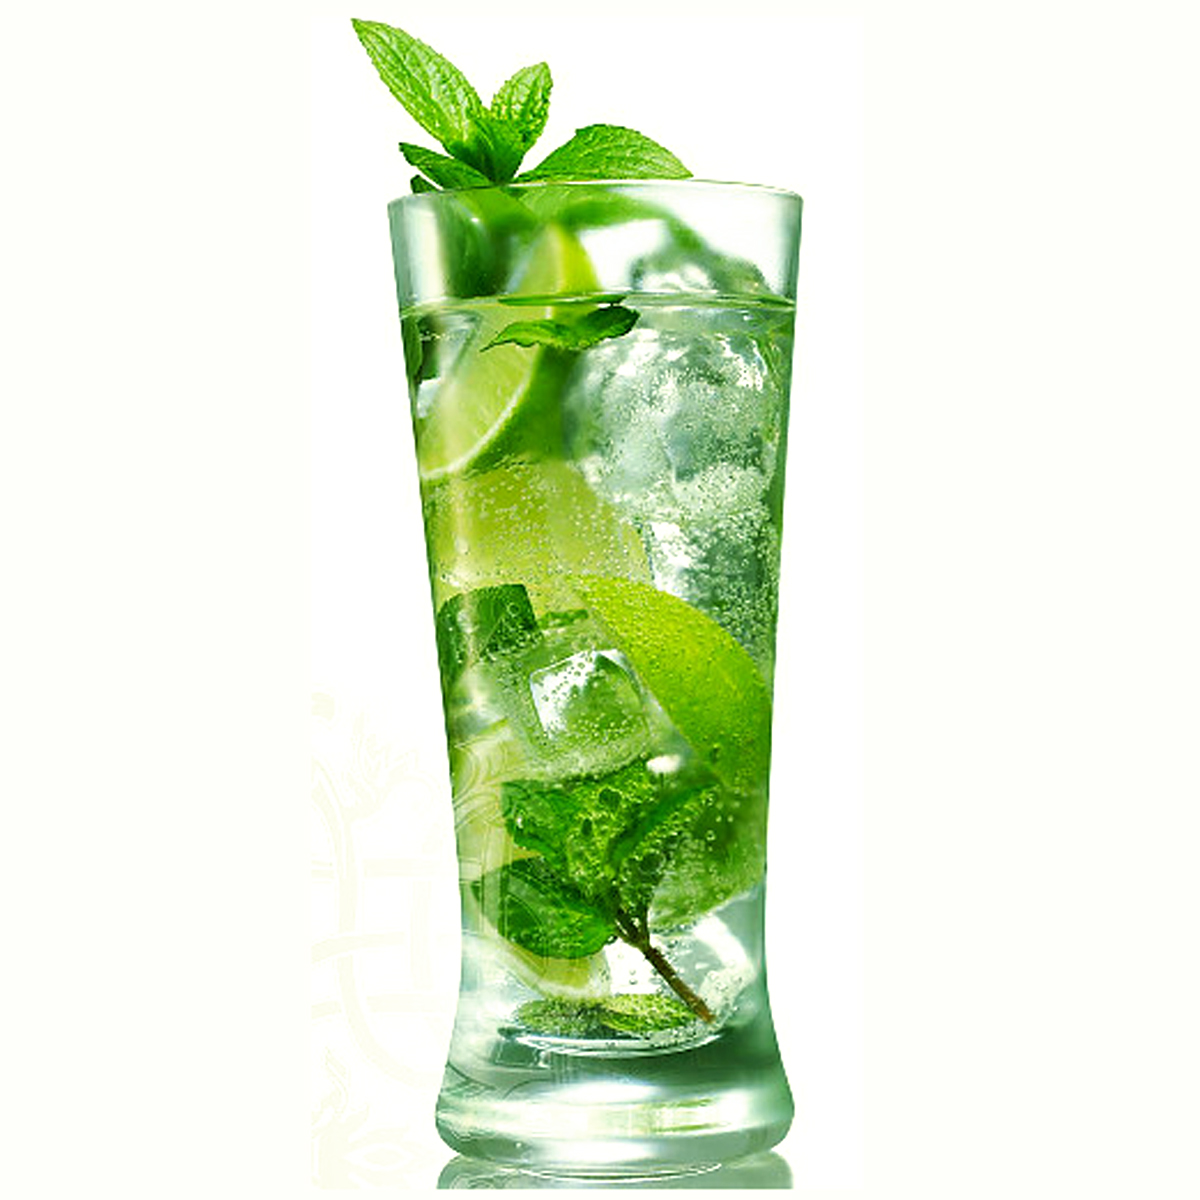 Mojito Desktop Wallpapers Wallpapers High Quality | Download Free